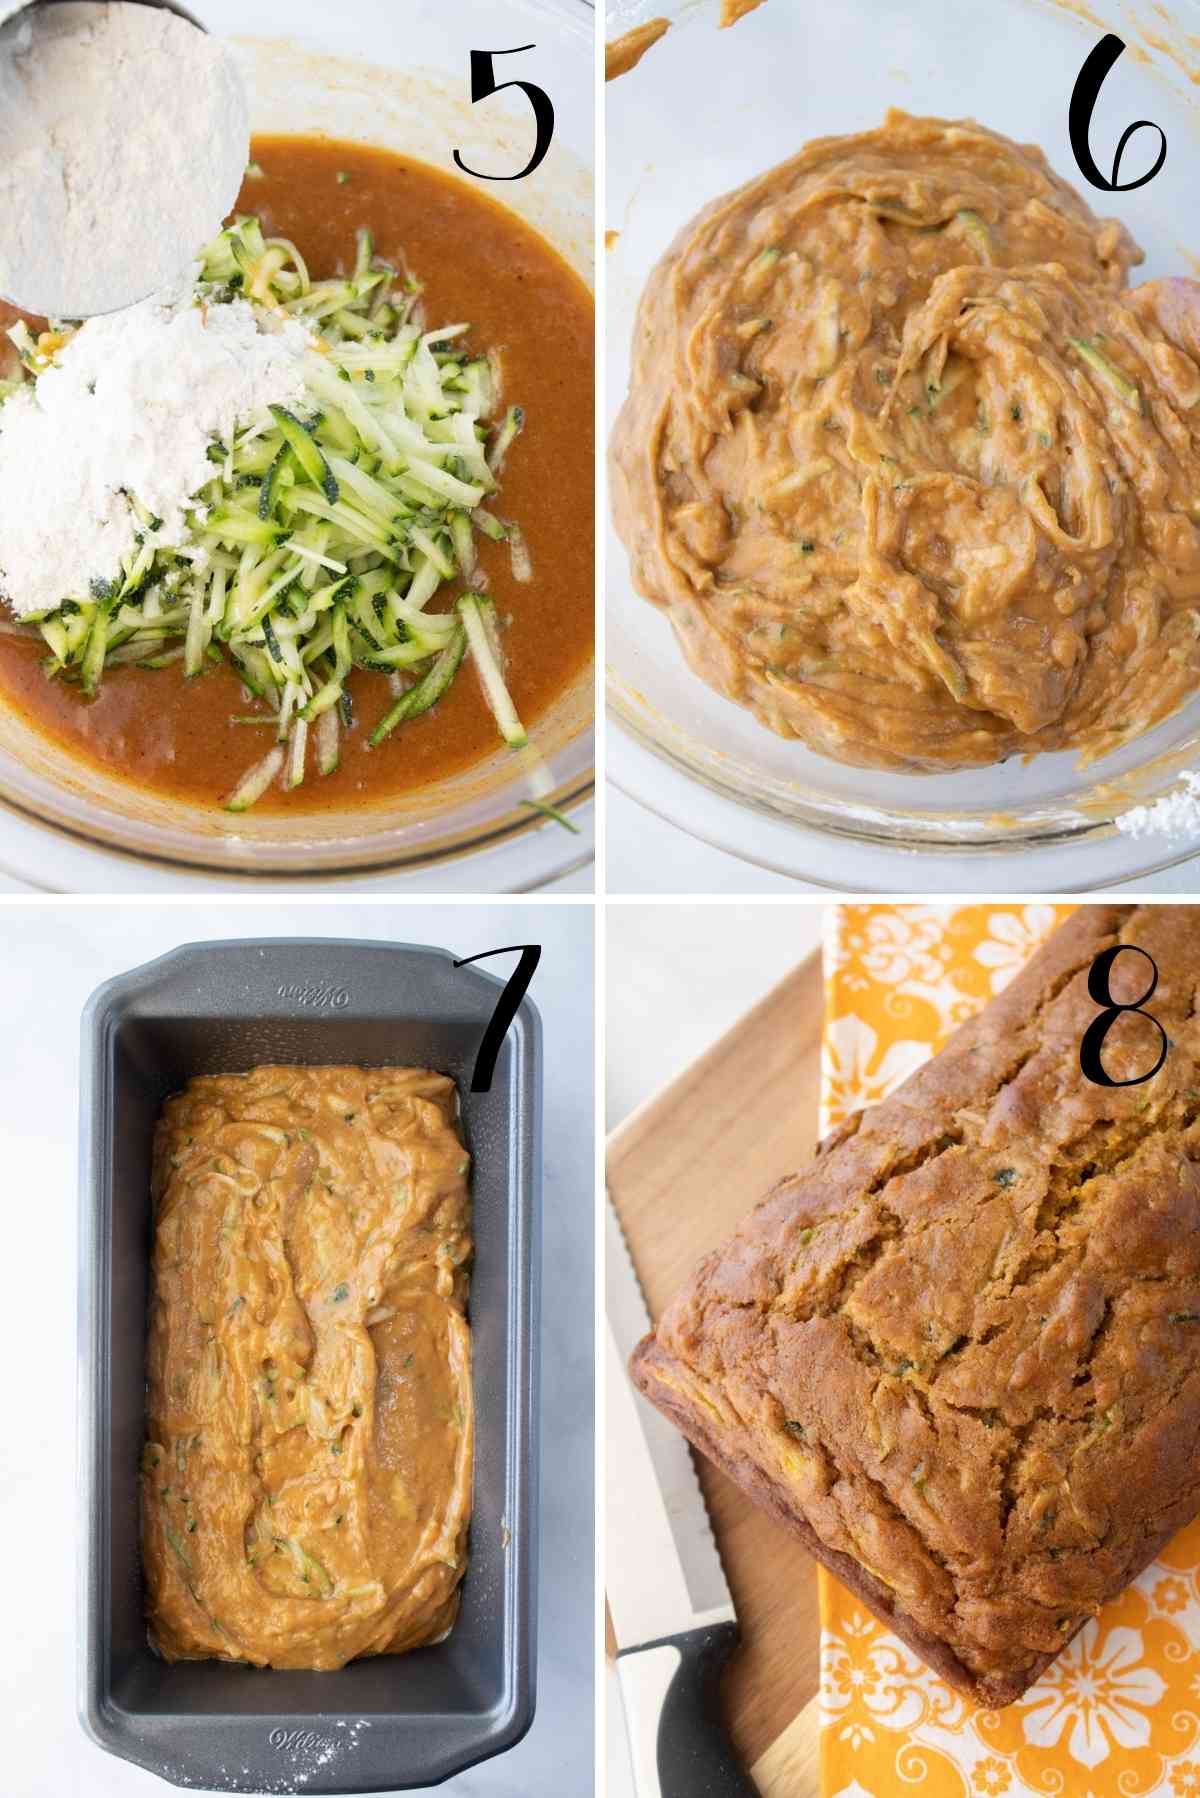 Stir in the flour and zucchini, pour in a loaf pan and bake!